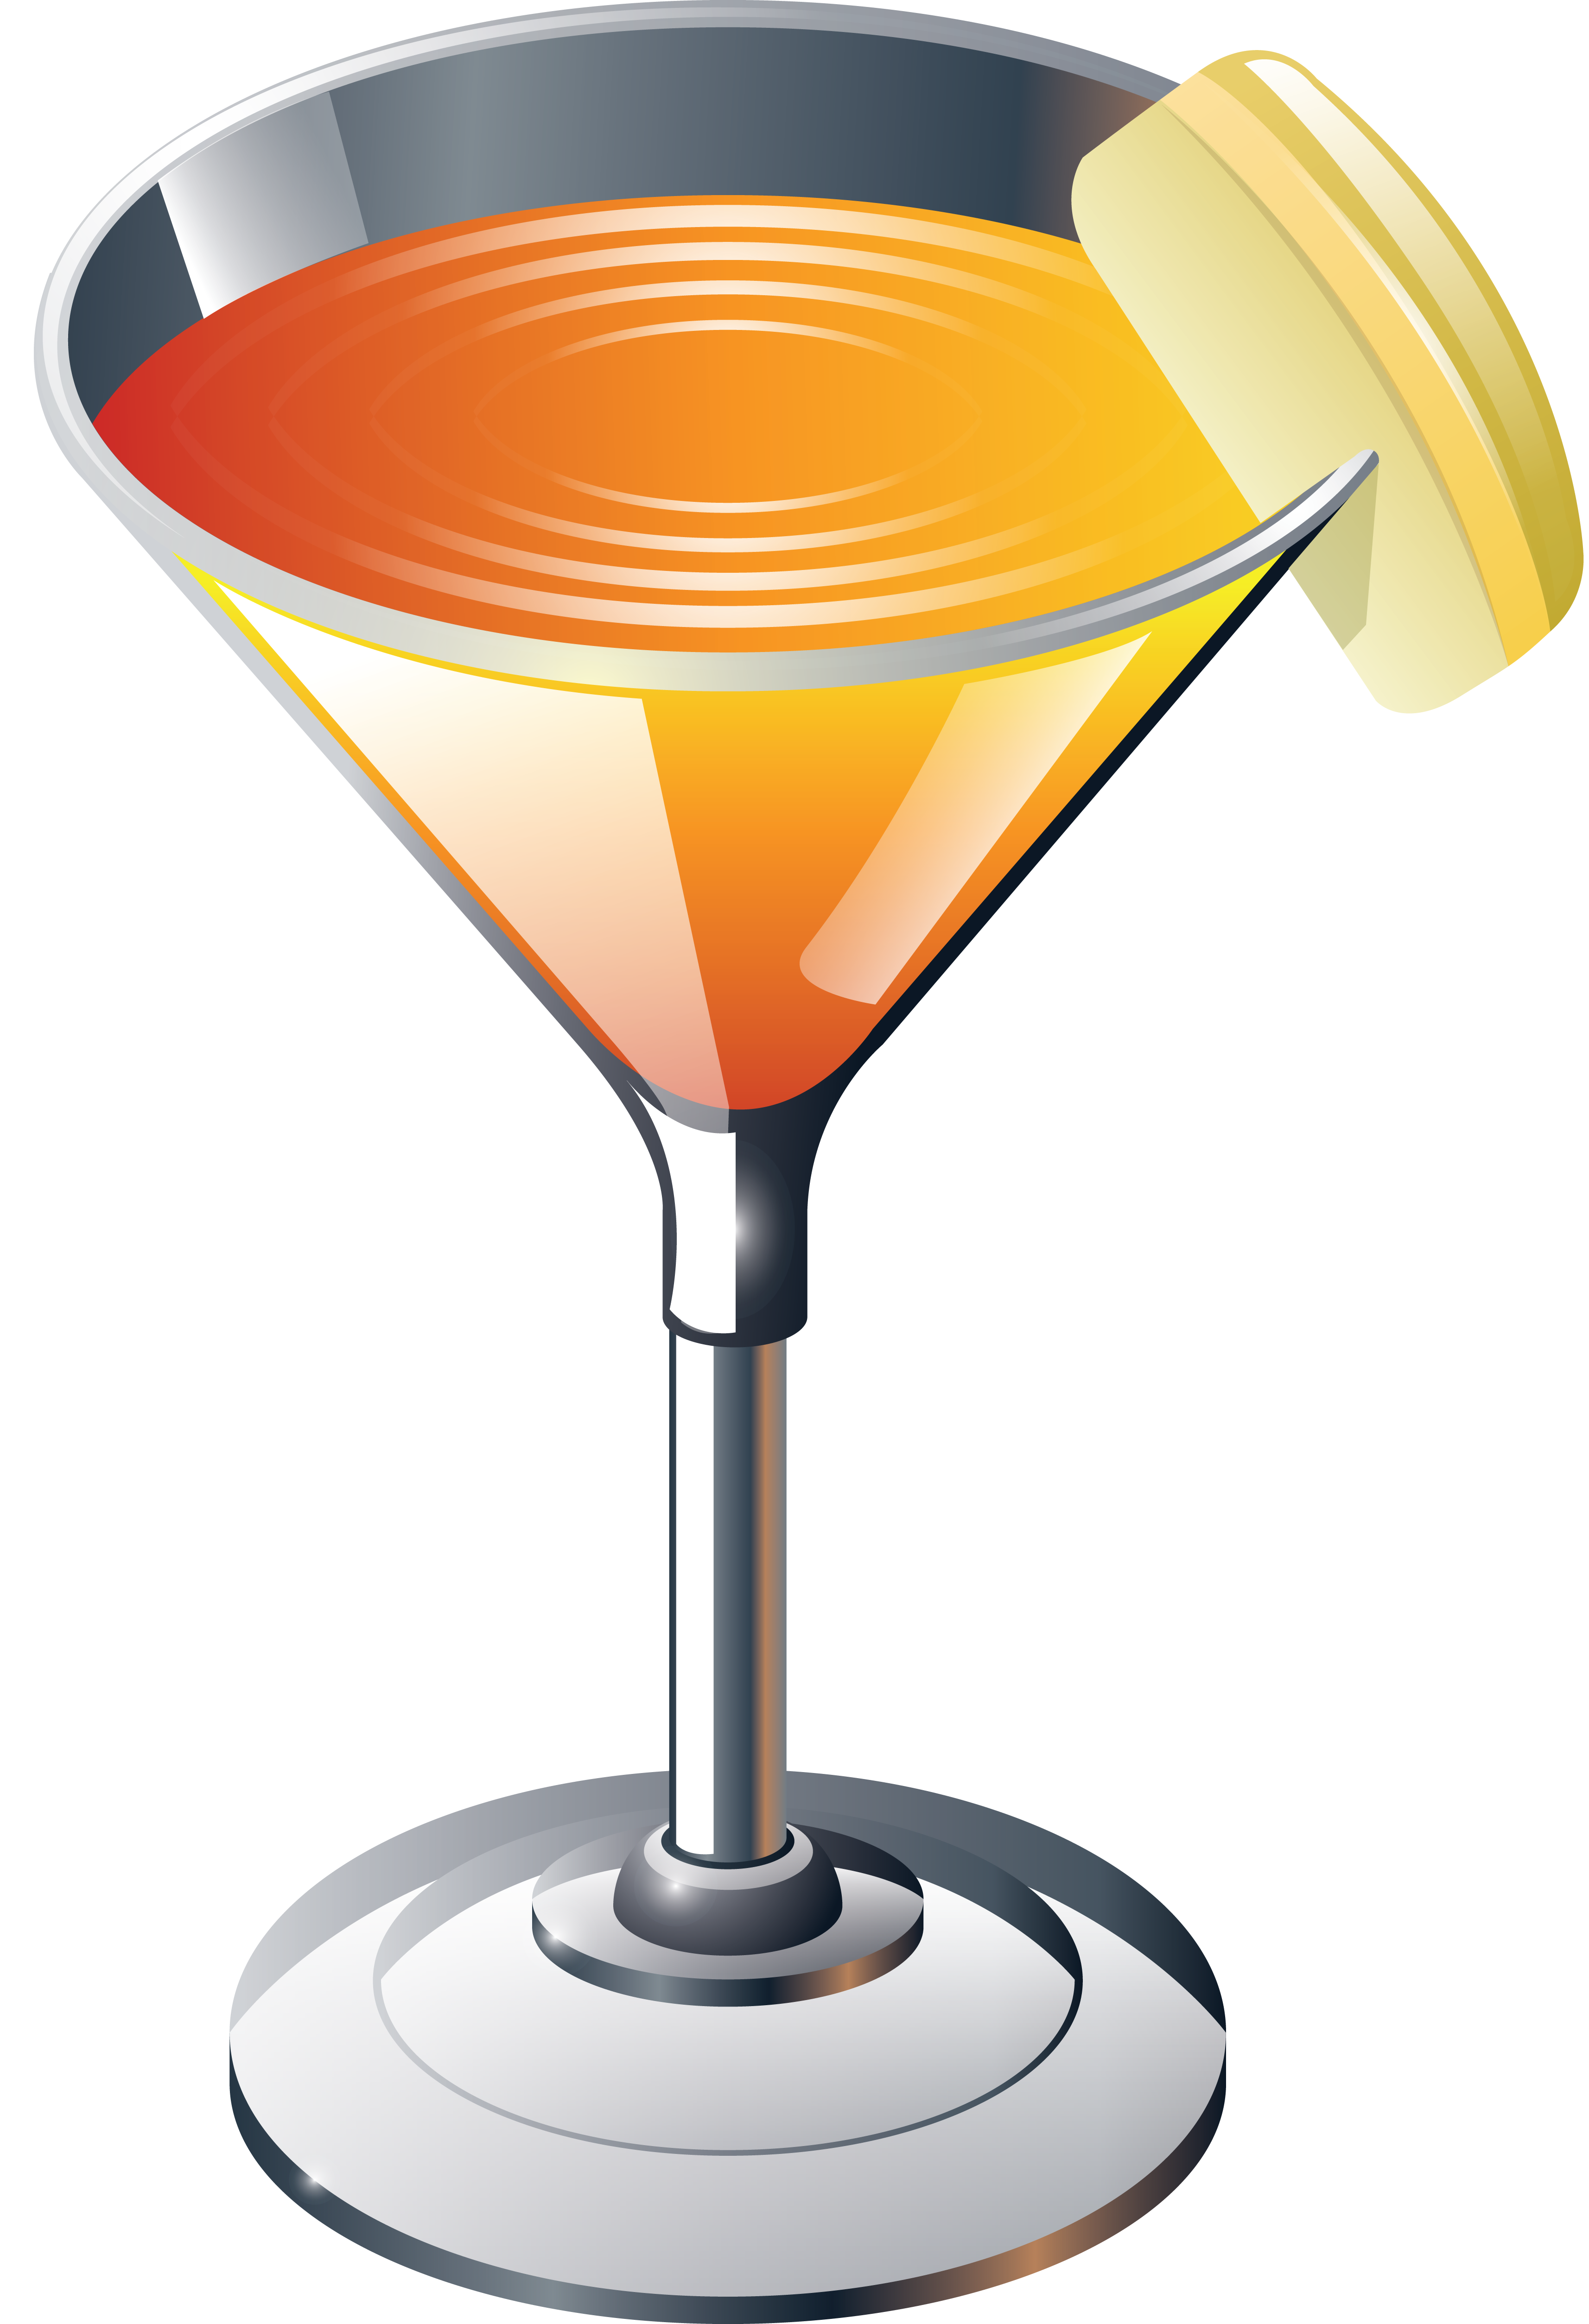 Cocktails clipart manhattan cocktail. Png image purepng free